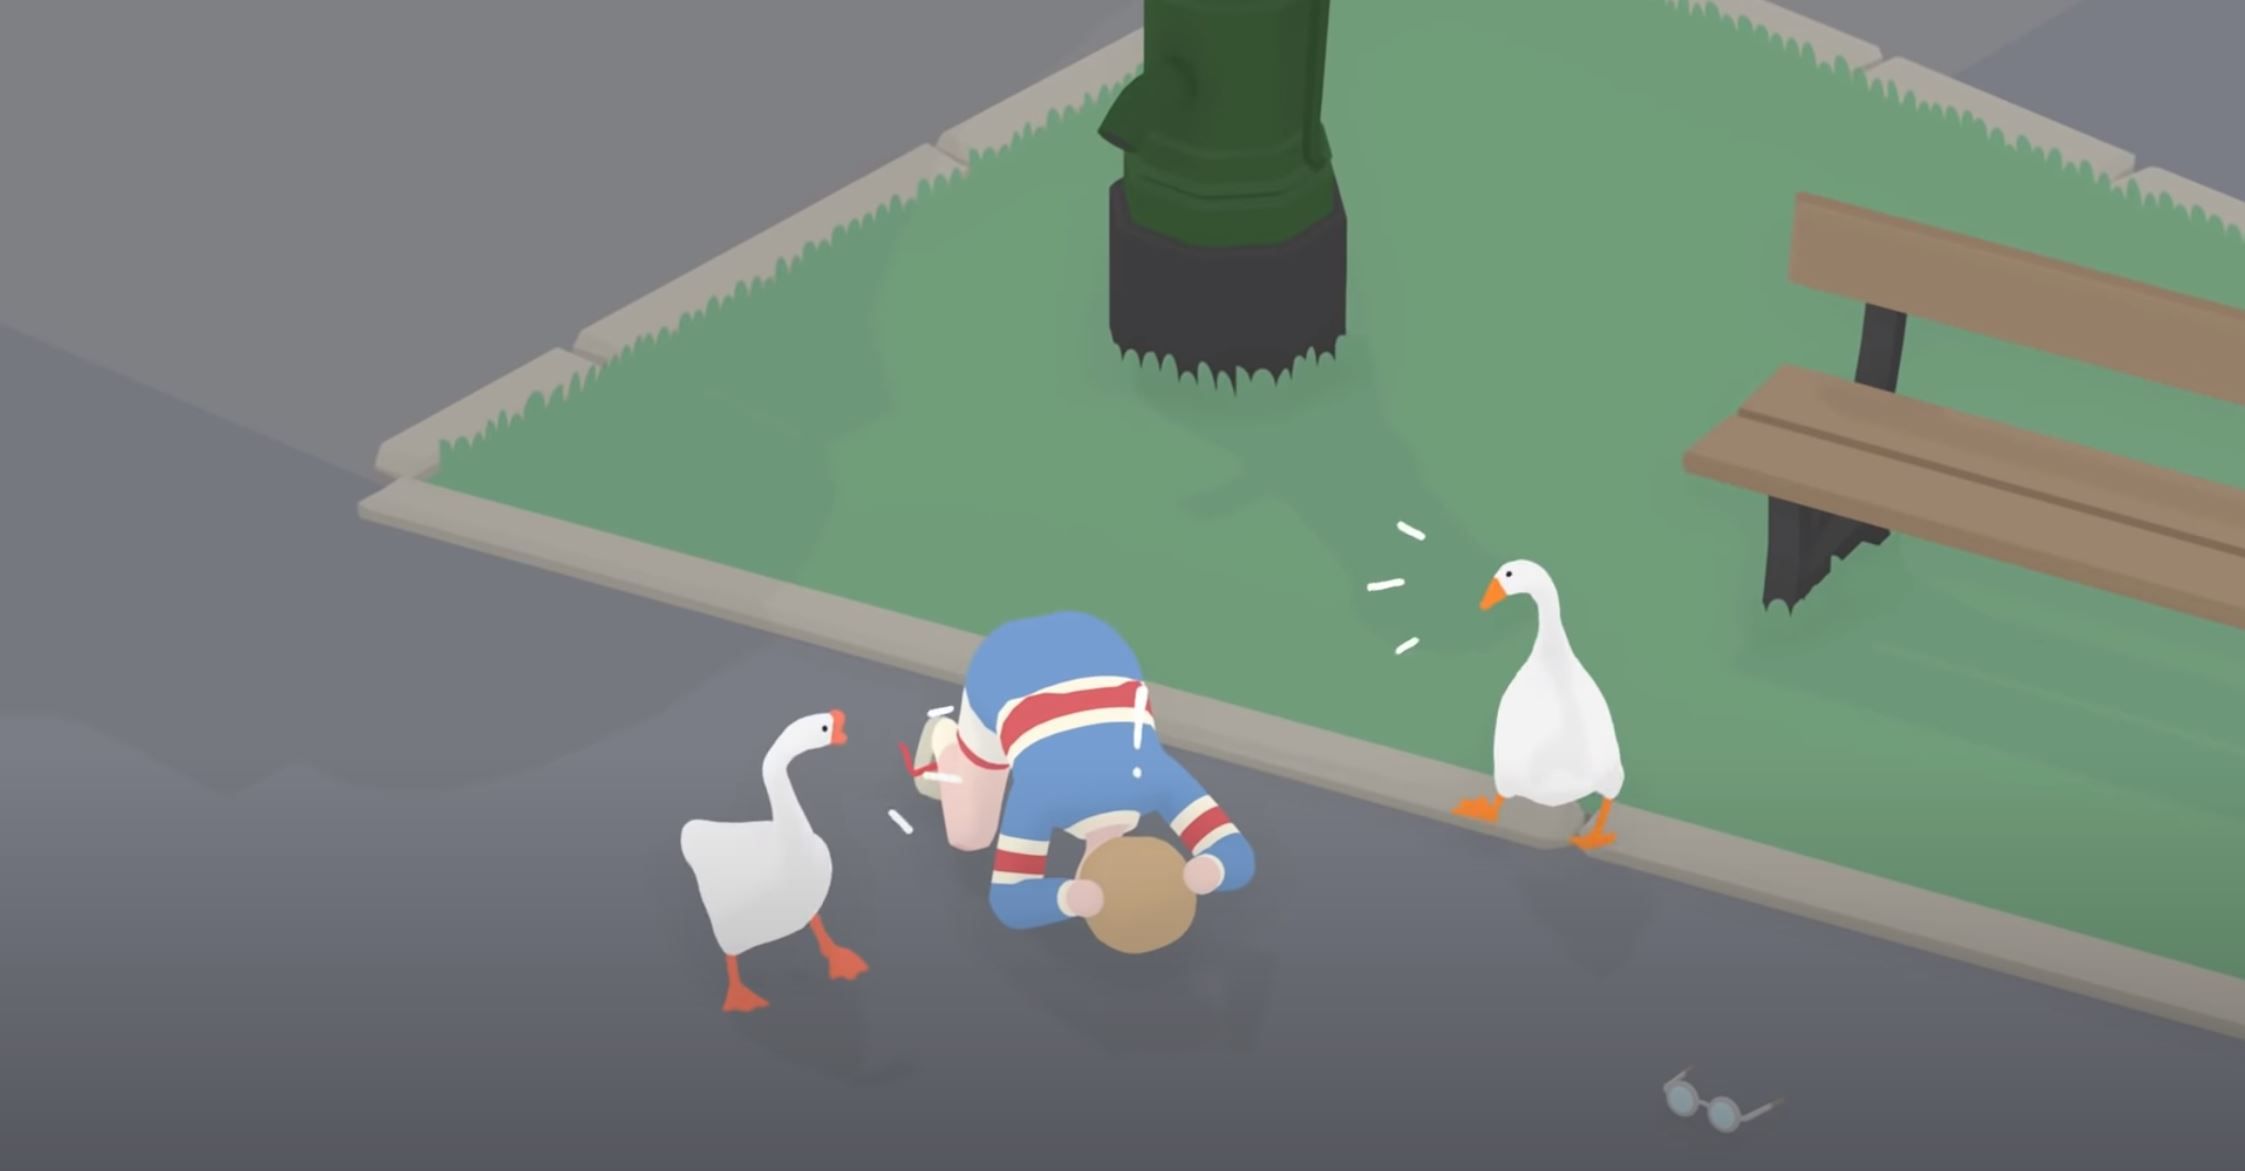 The Untitled Goose Game-Double Trouble Review — Reviews by supersven